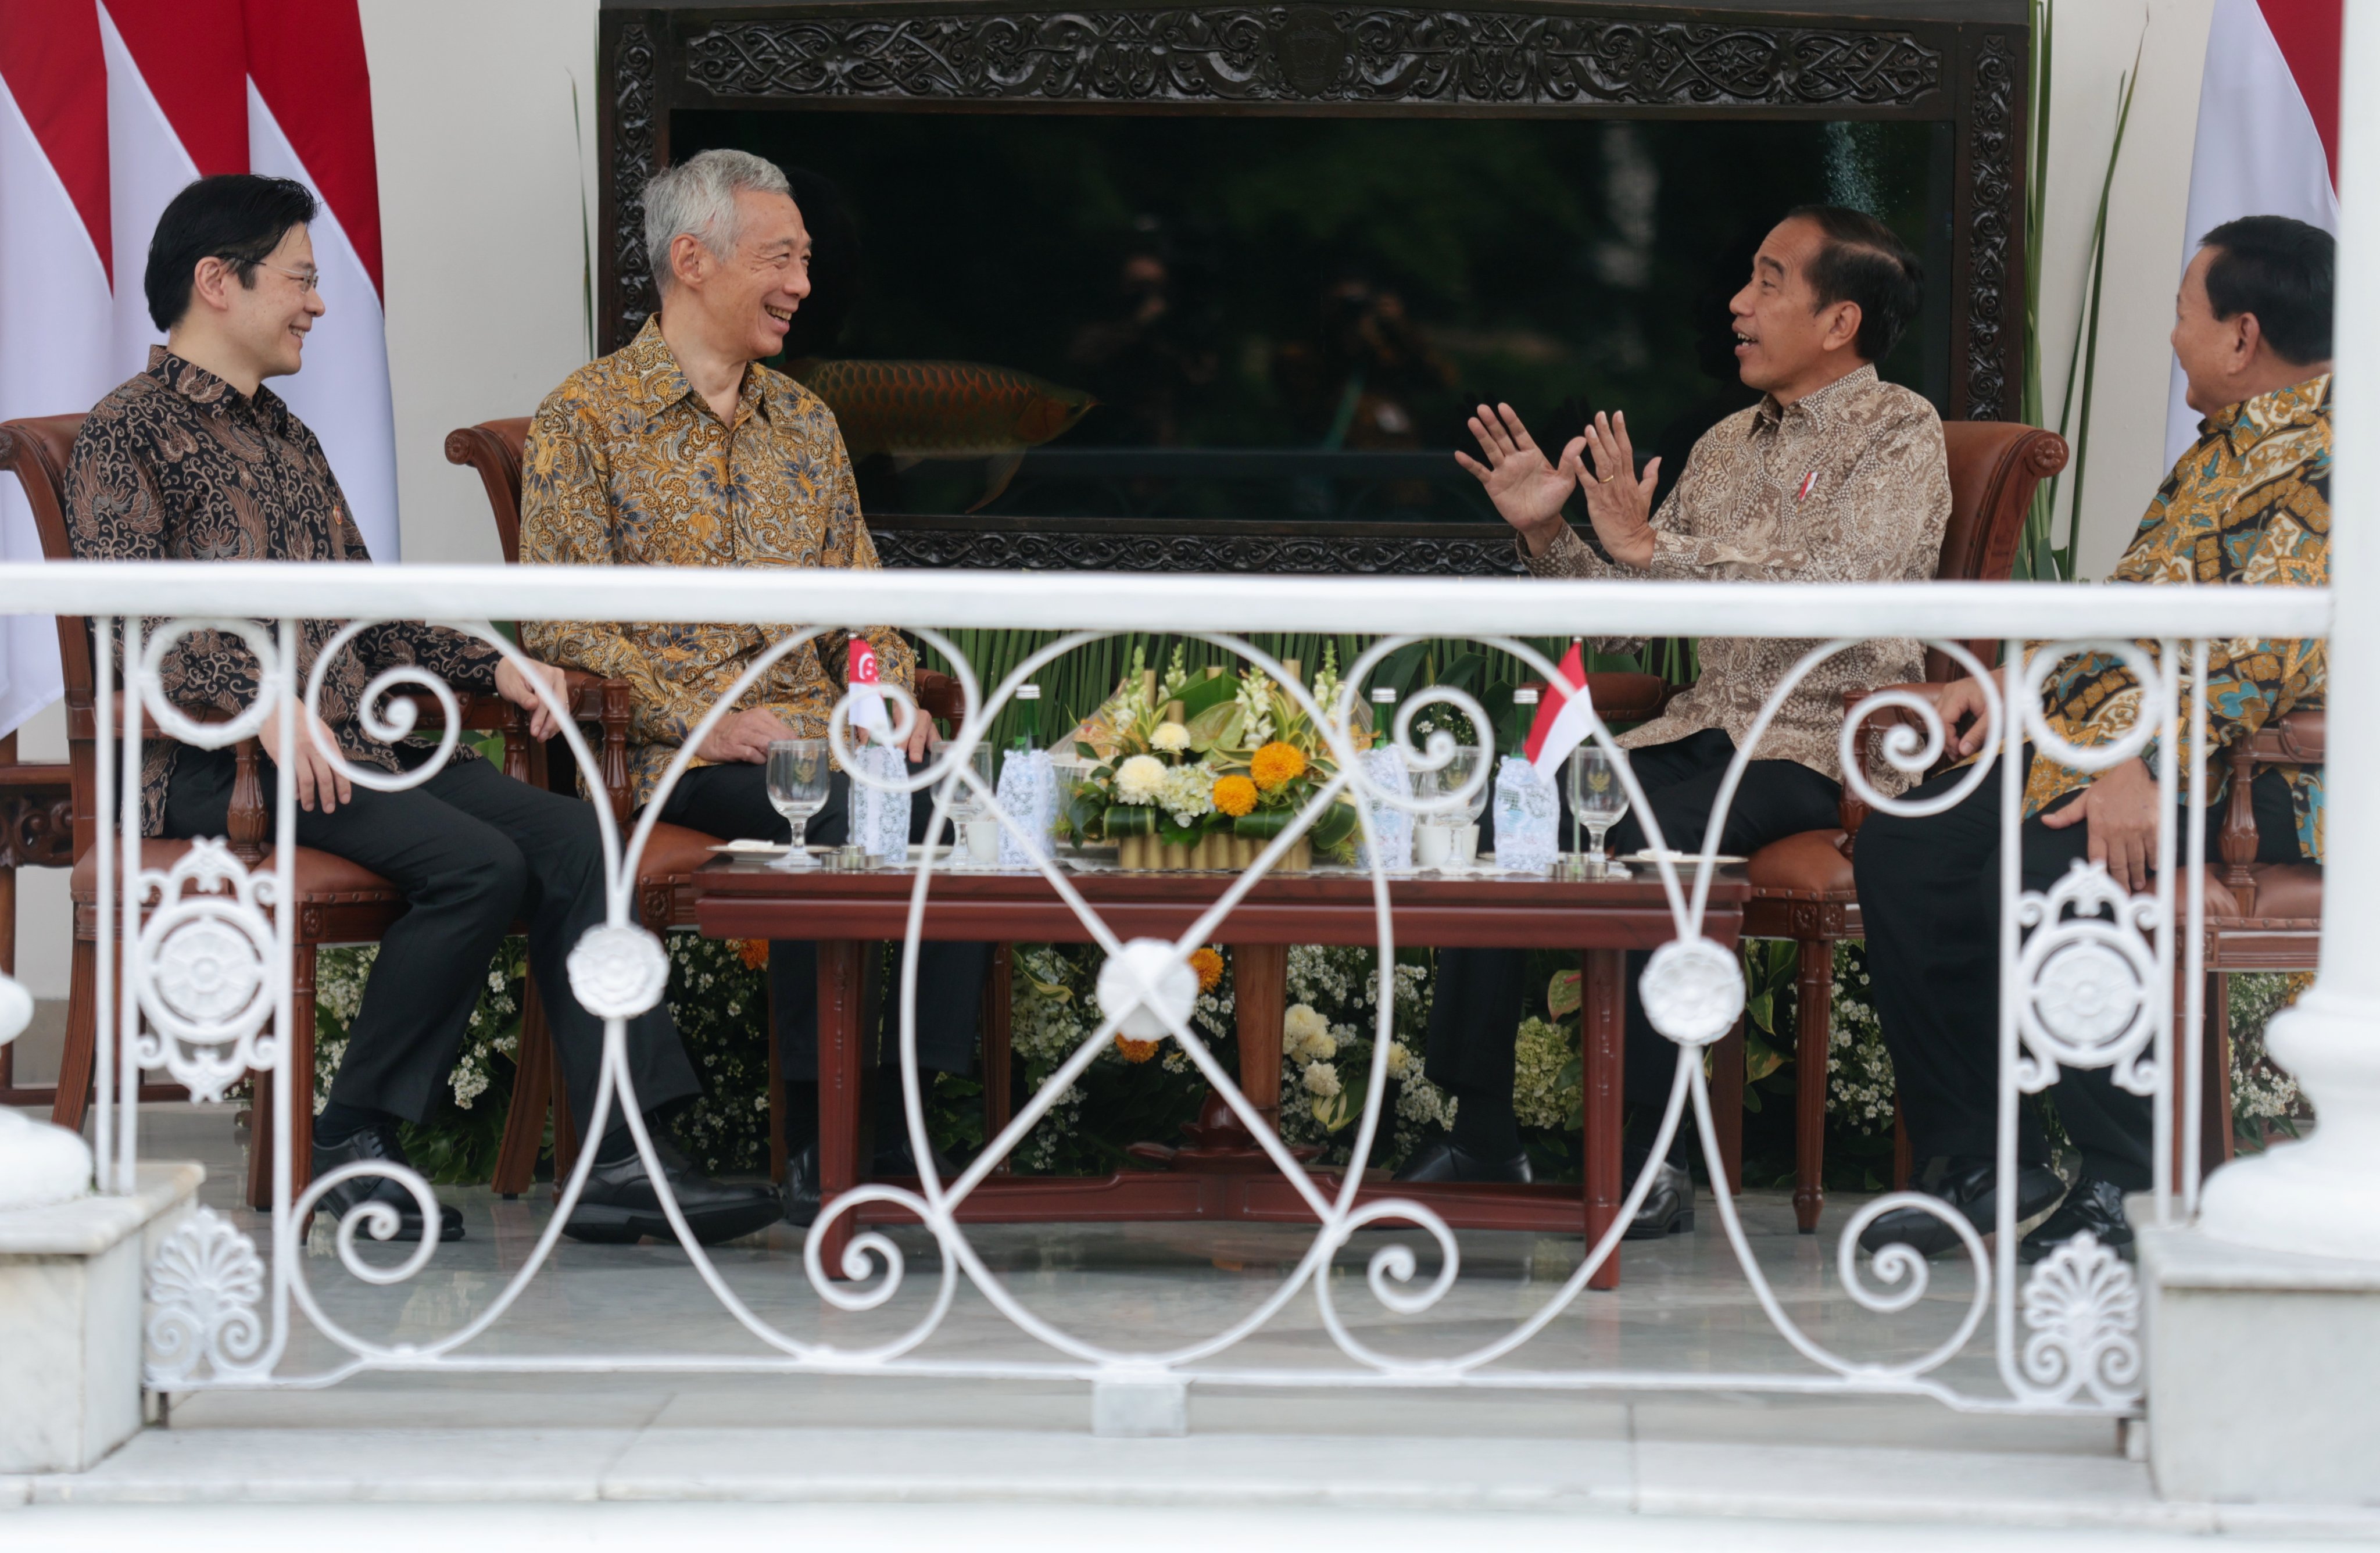 Singapore Prime Minister Lee Hsien Loong (second from left) and his deputy Lawrence Wong (left) with Indonesian President Joko Widodo (second from right) and Indonesian Defence Minister Prabowo Subianto (right) during their meeting at the Singapore-Indonesia Leaders’ Retreat at the Presidential Palace in Bogor, Indonesia, on Monday. Photo: EPA-EFE